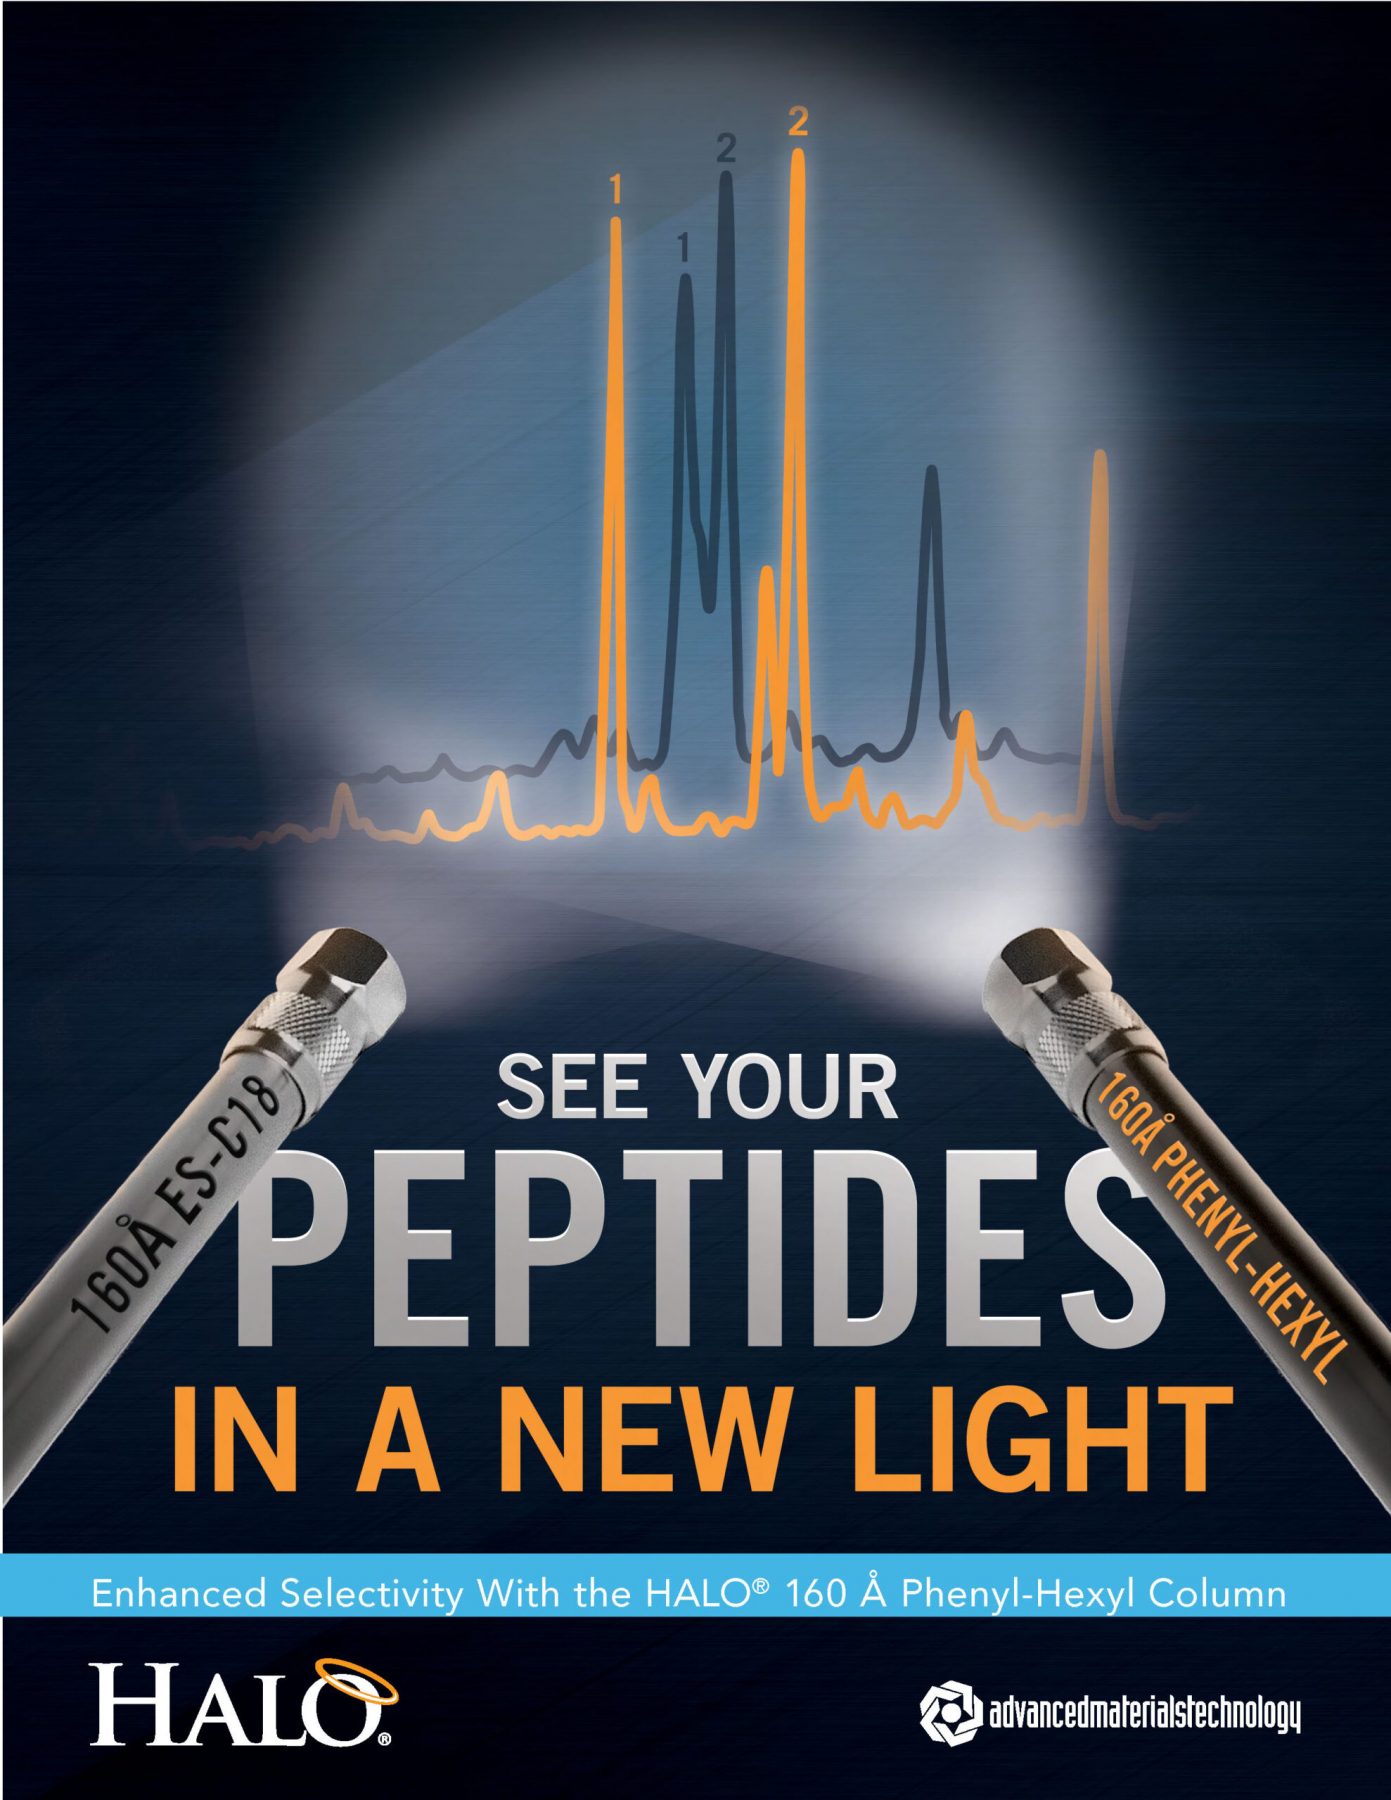 see your peptides in a new light with halo phenyl hexyl column